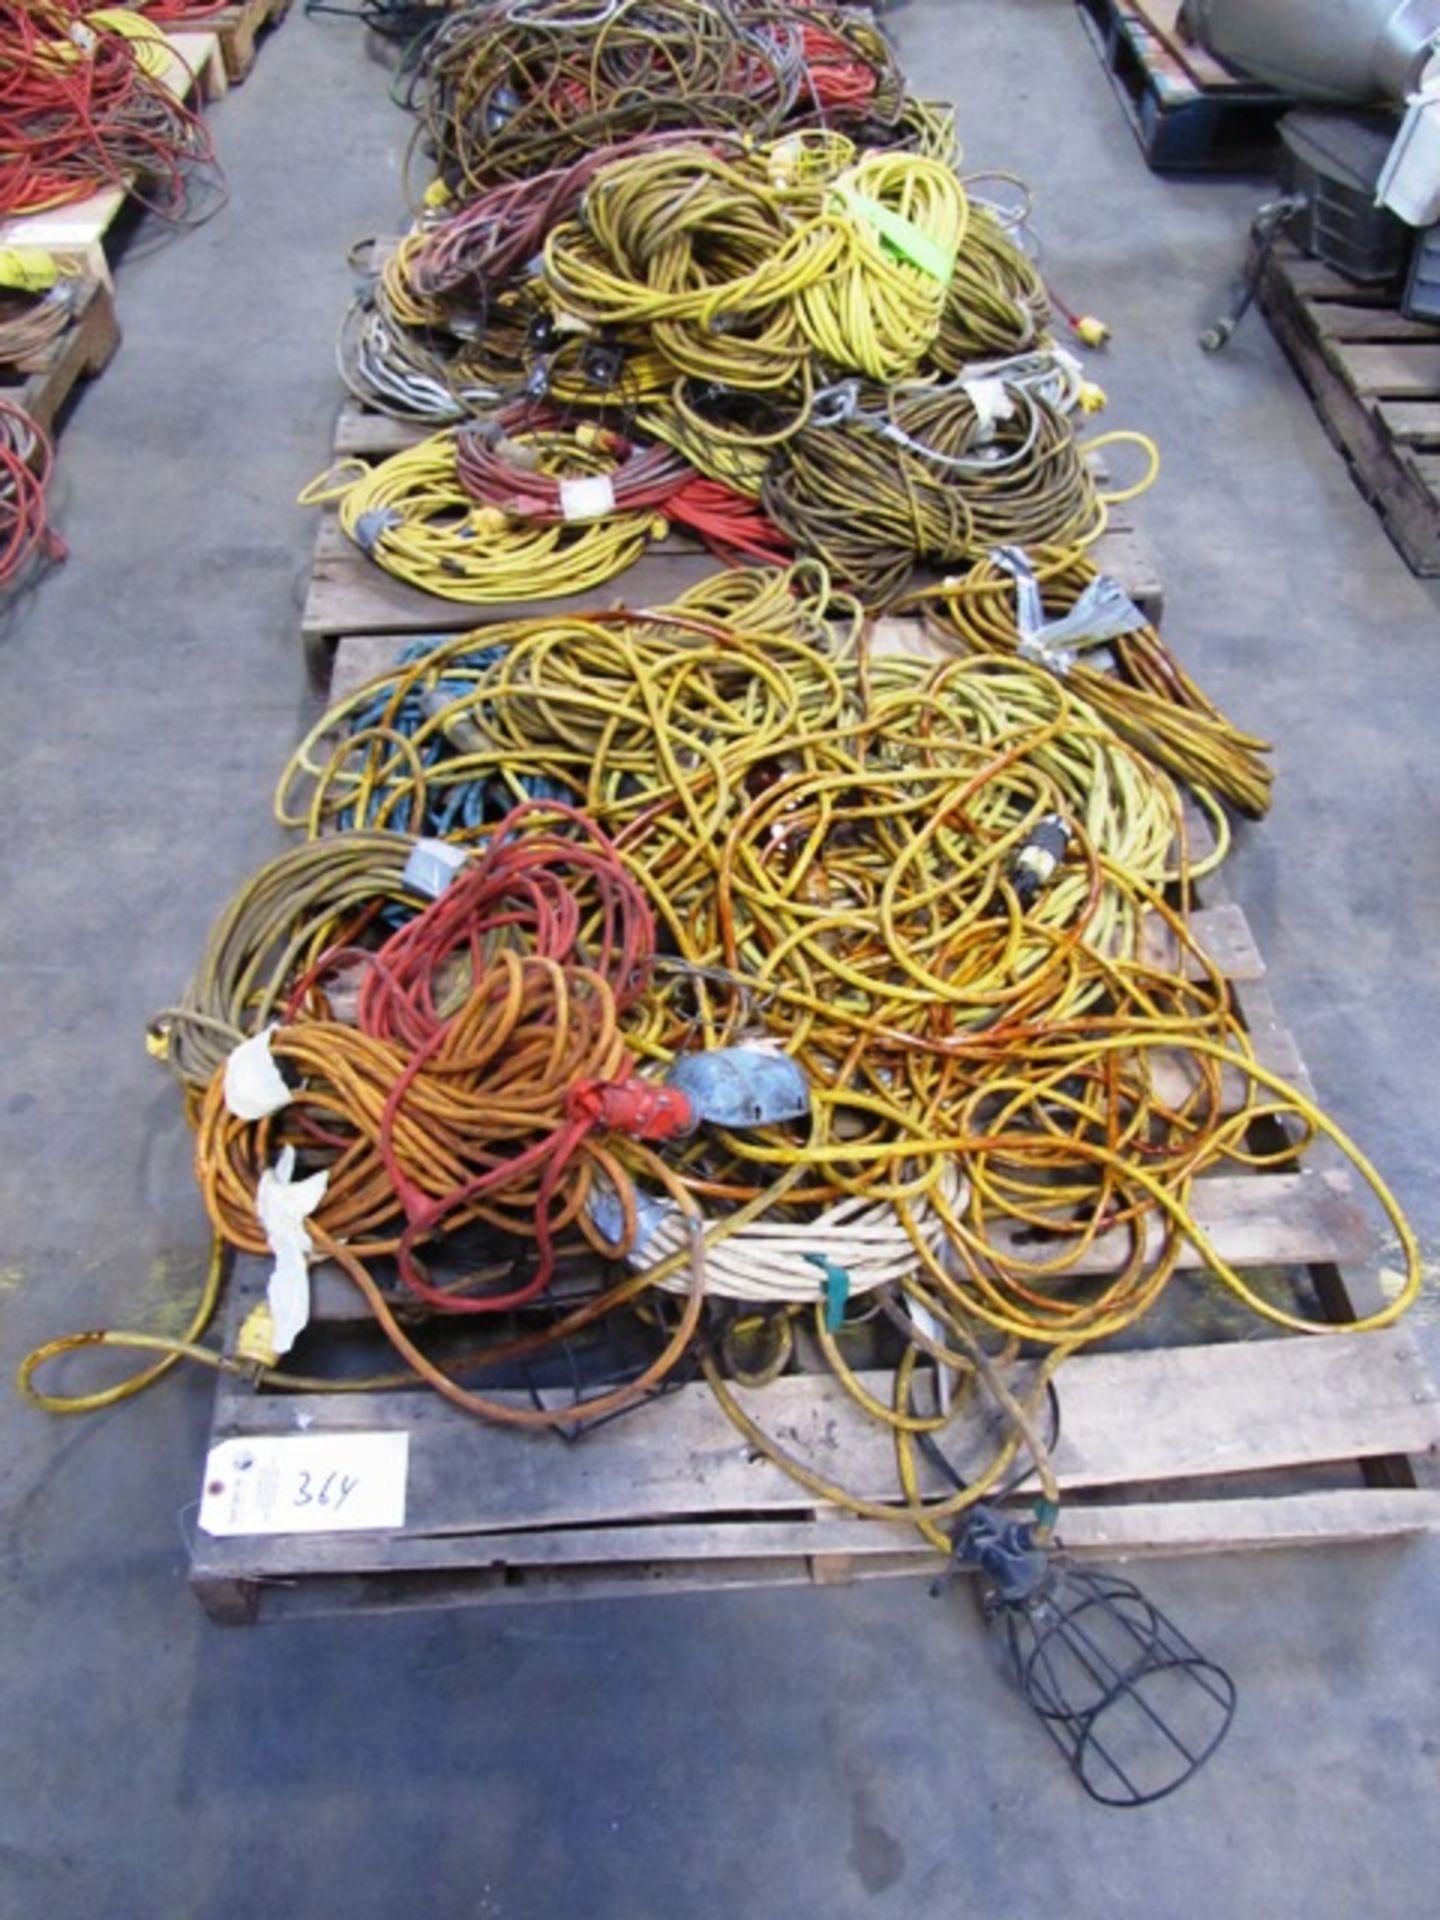 Extension Cords (on (2) pallets)